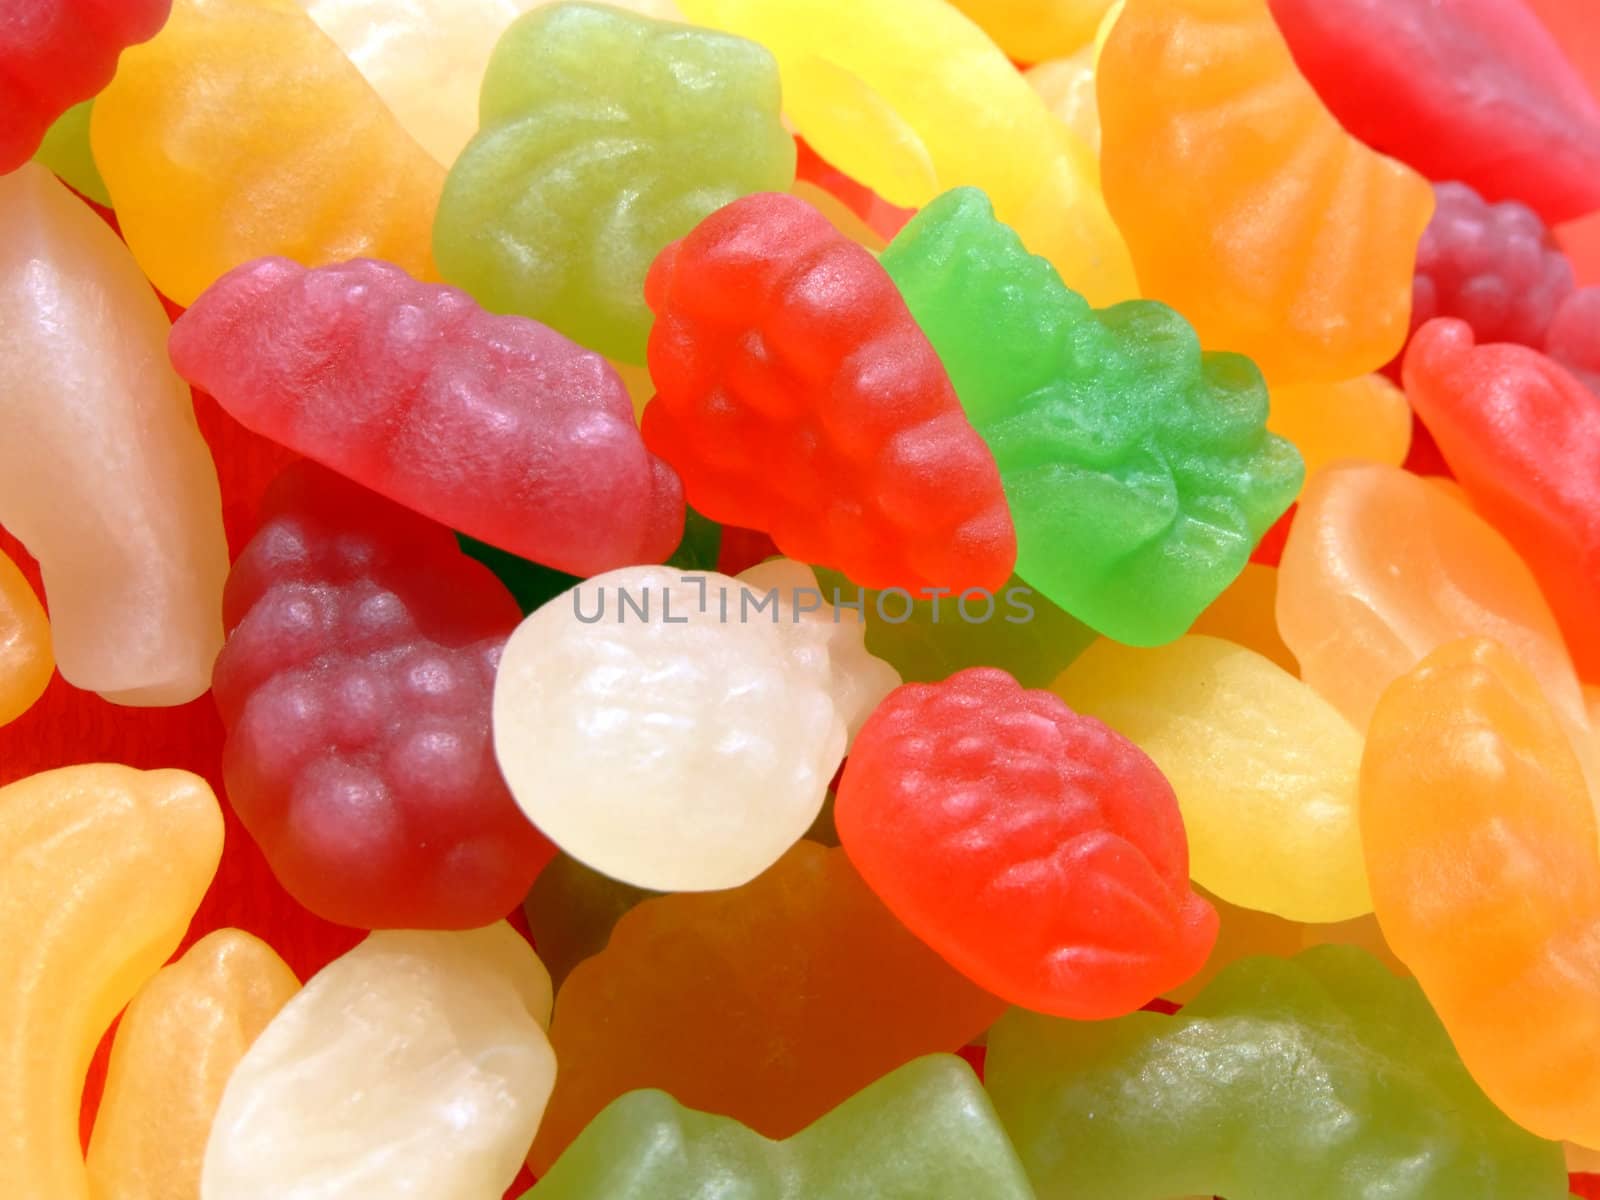 Mixed fruit flavored candies